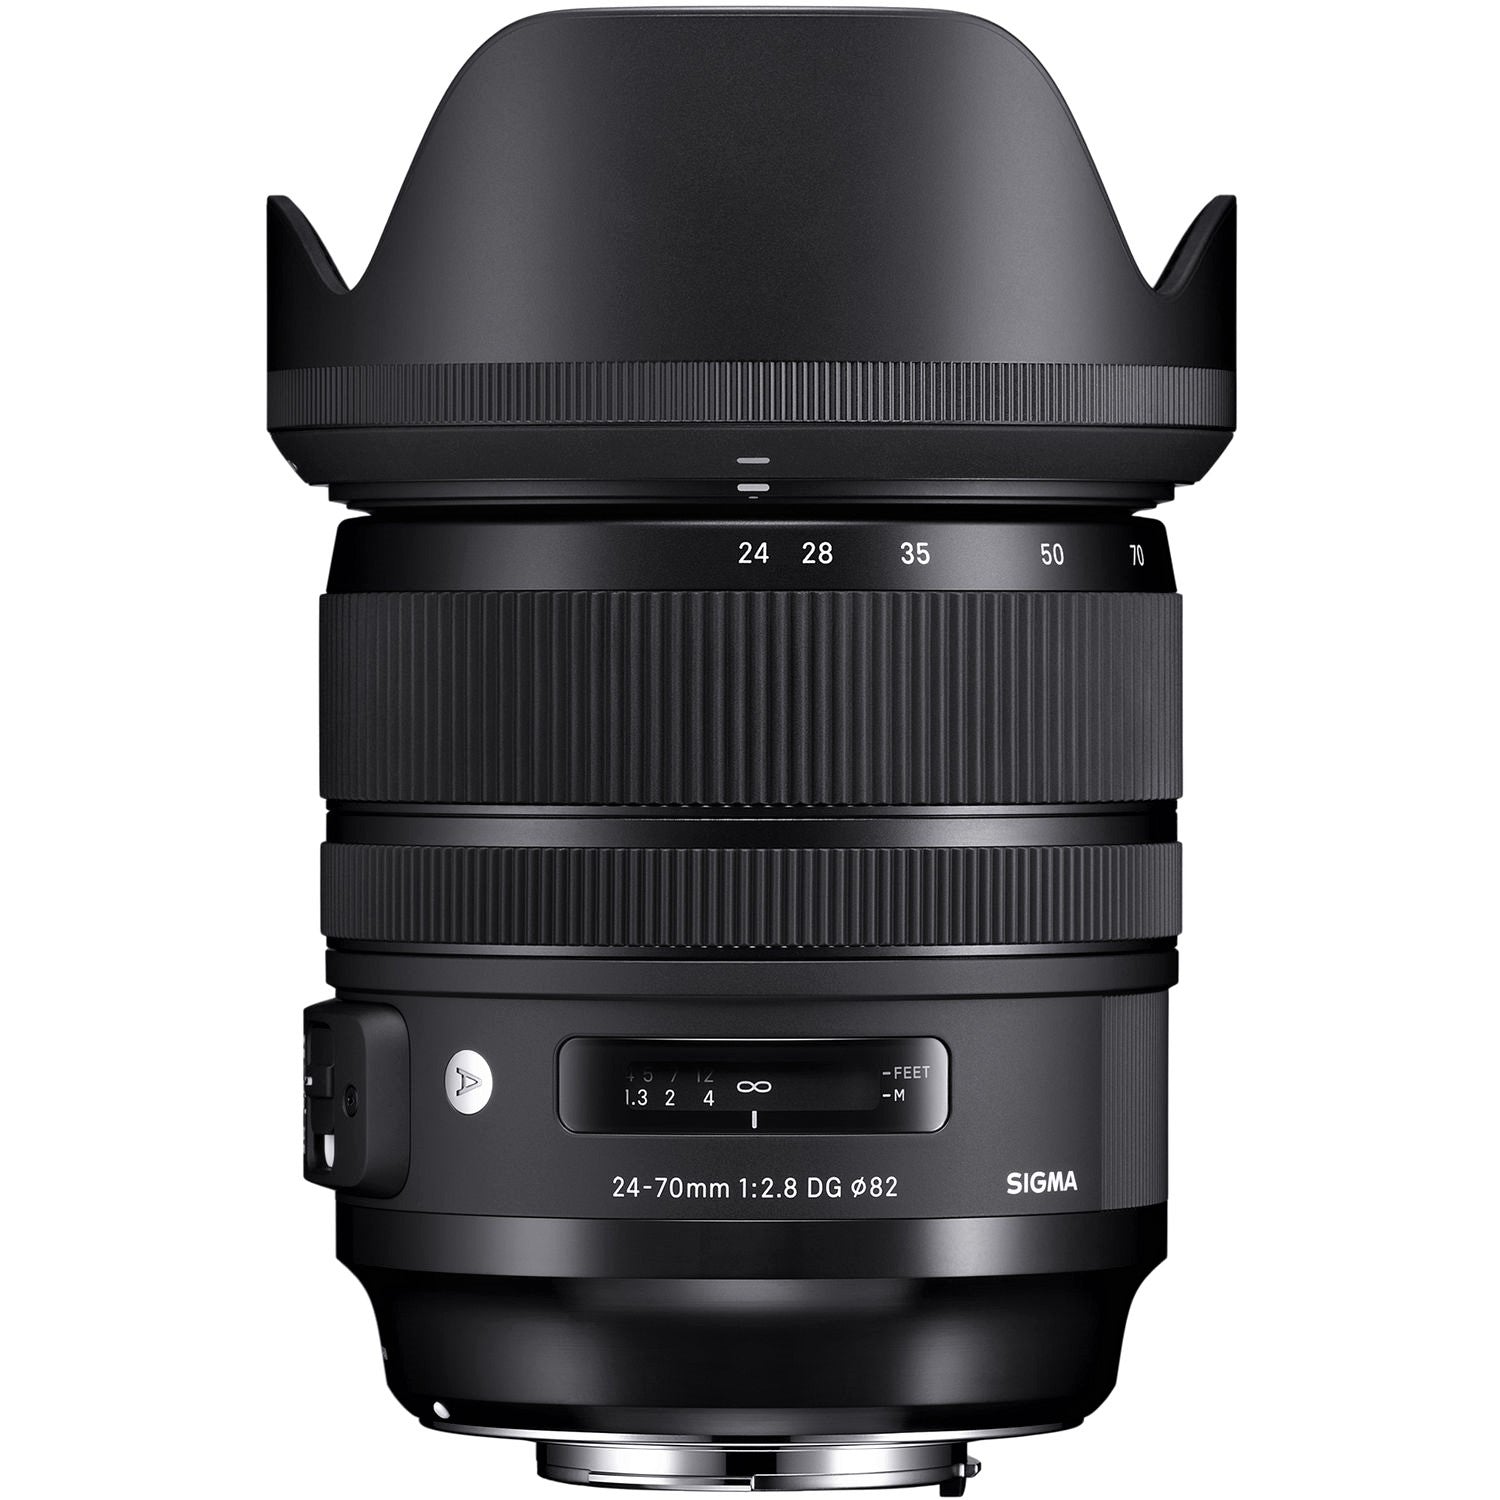 Sigma 24-70mm F2.8 DG OS HSM Art Lens for Canon EF with Attached Lens Hood on the Top